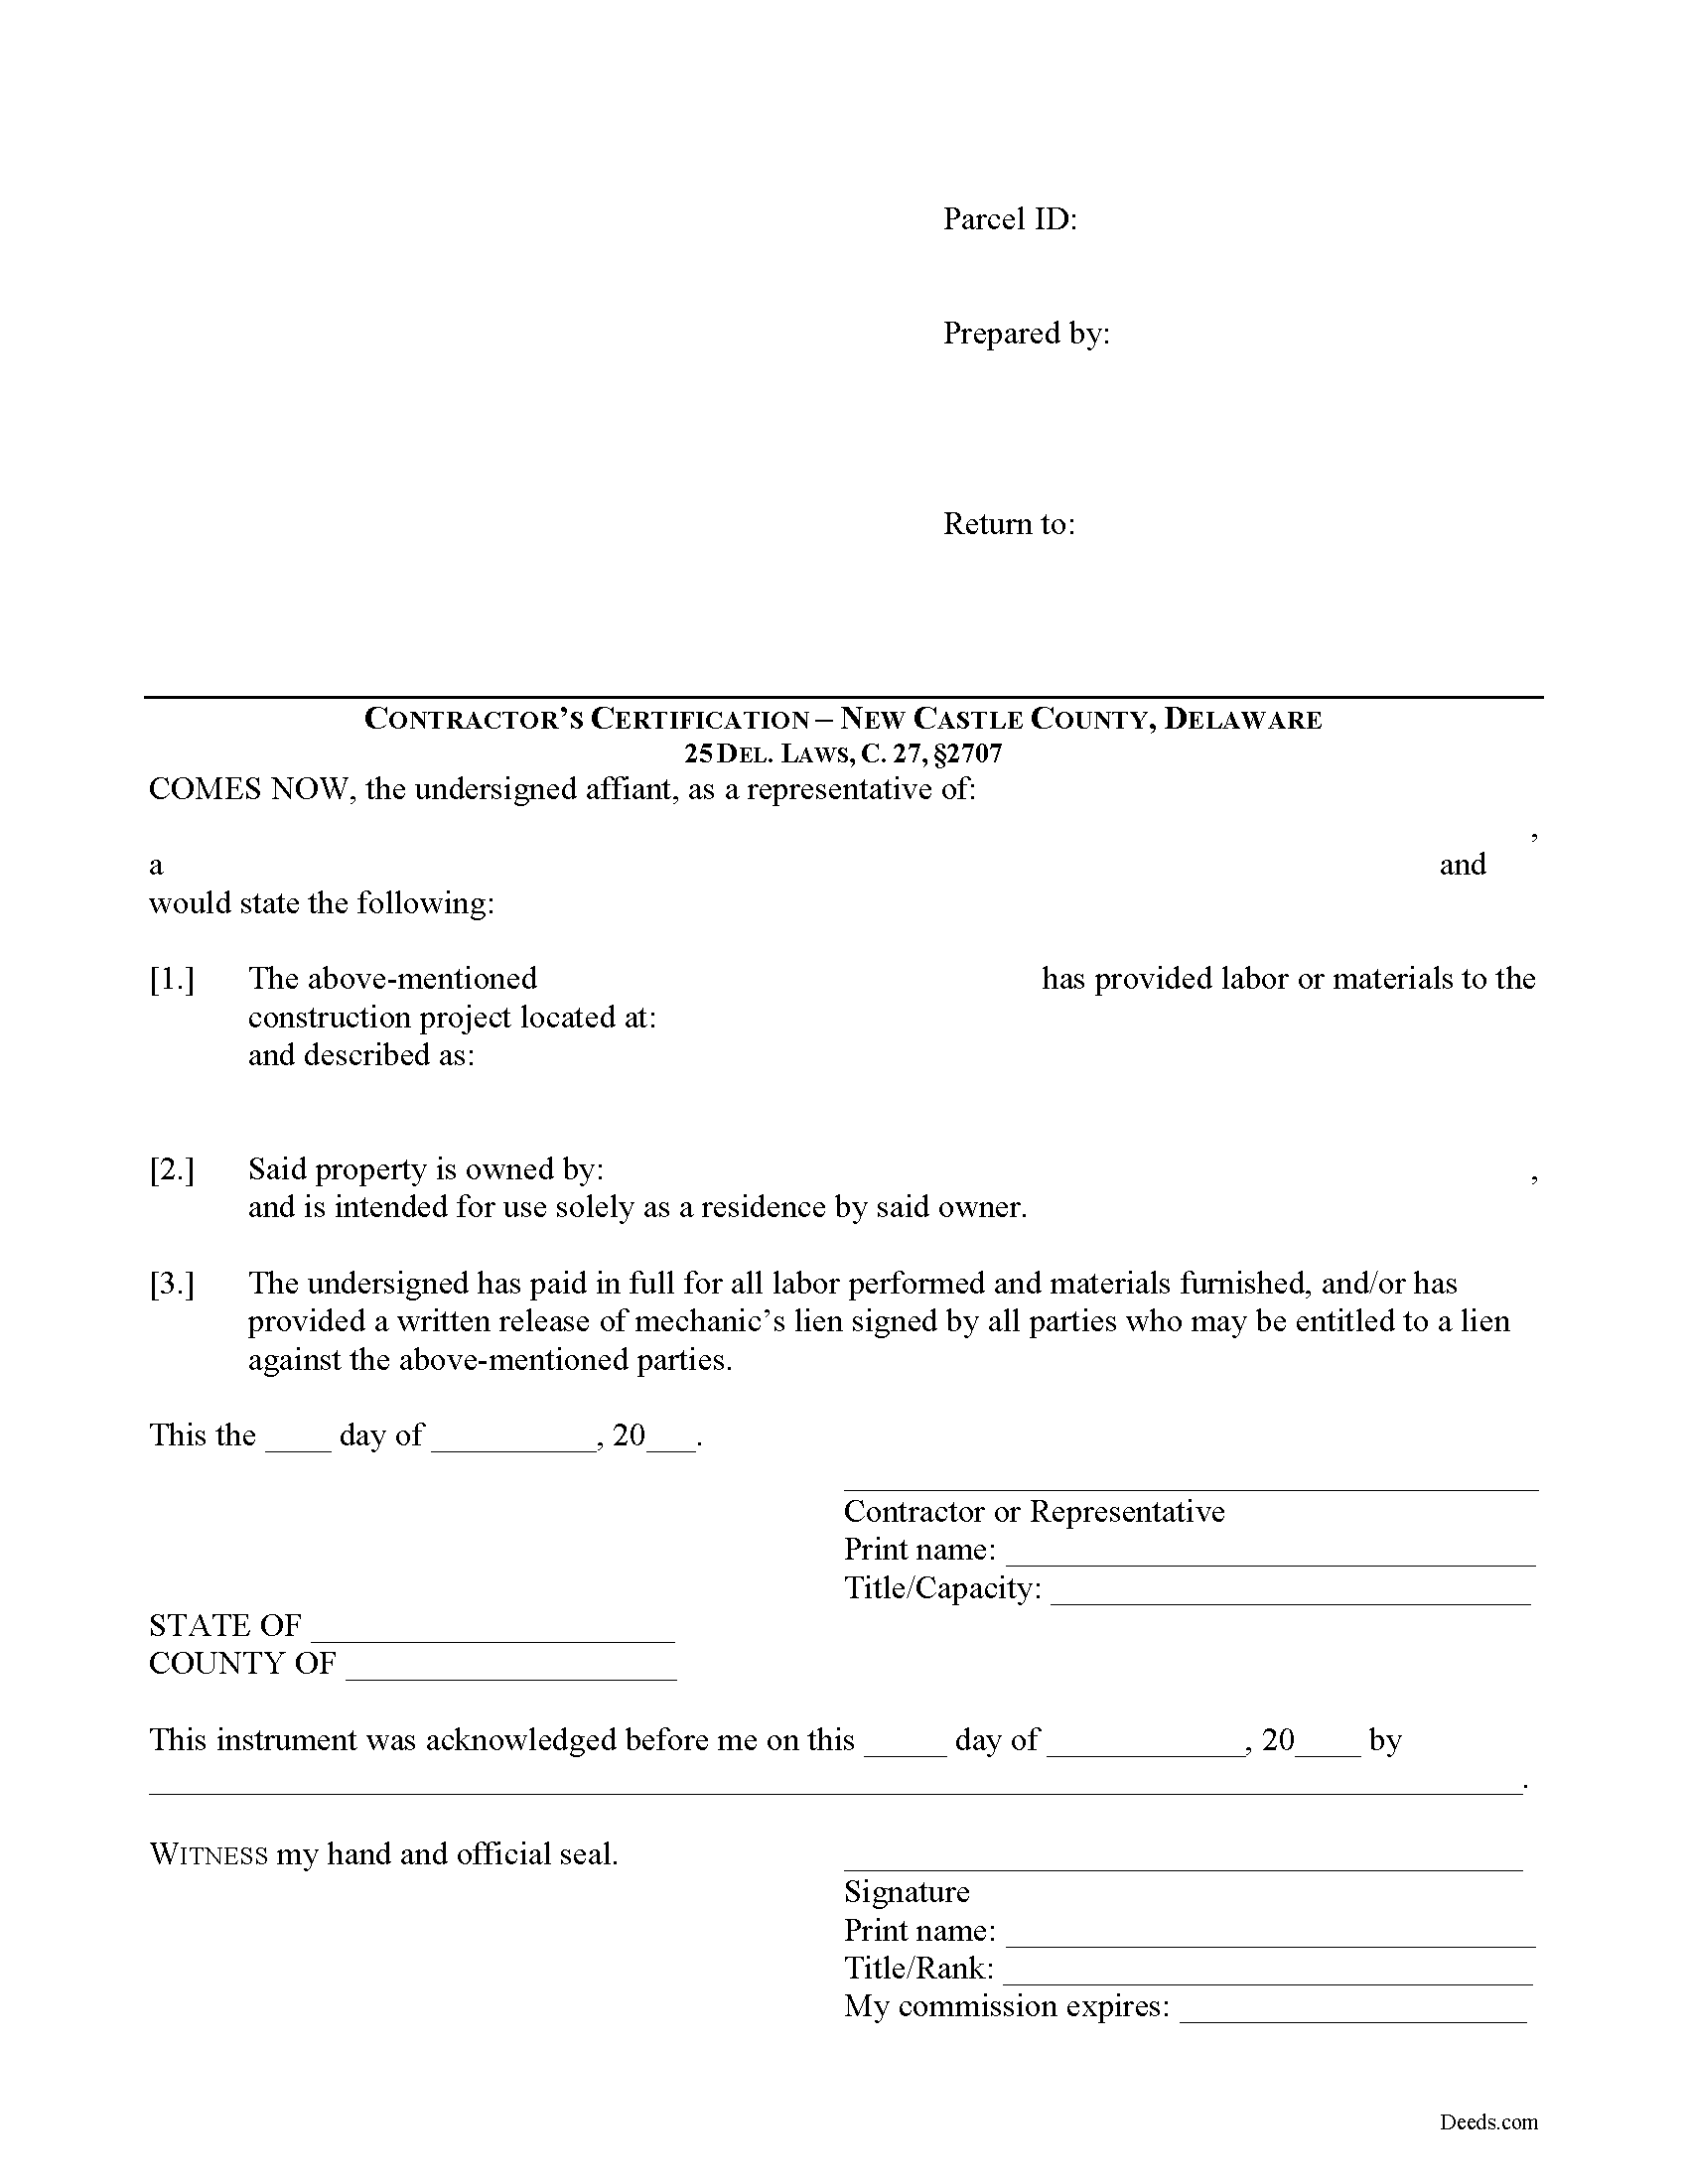 New Castle County Contractor Certification of Payment Form